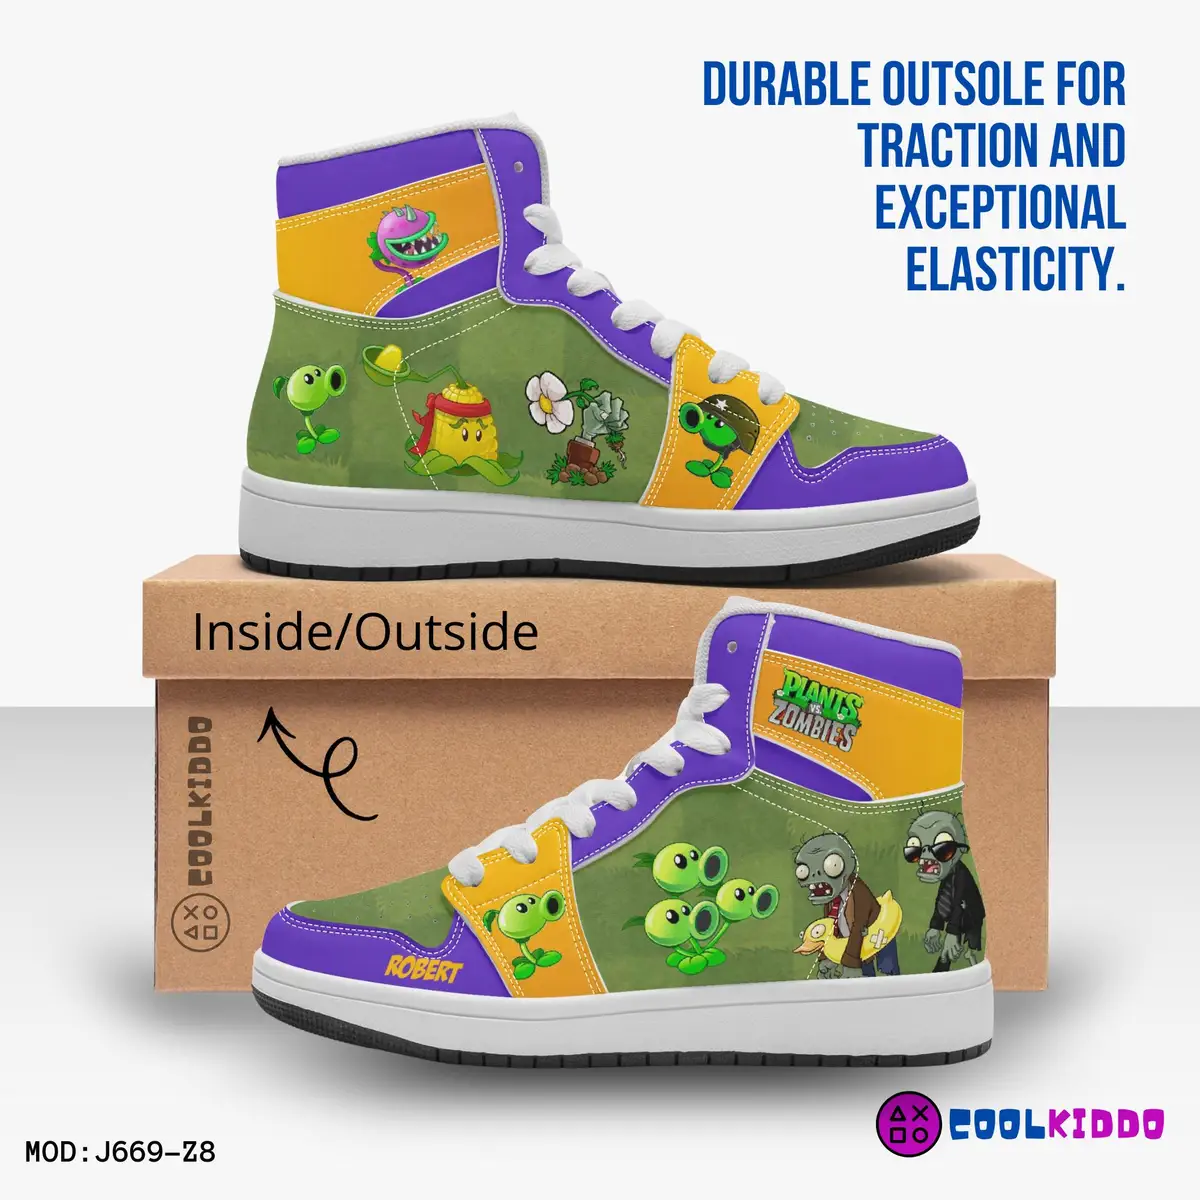 Personalized Plants vs Zombies Characters High-Top Leather Sneakers – Jordans Style Shoes Cool Kiddo 14